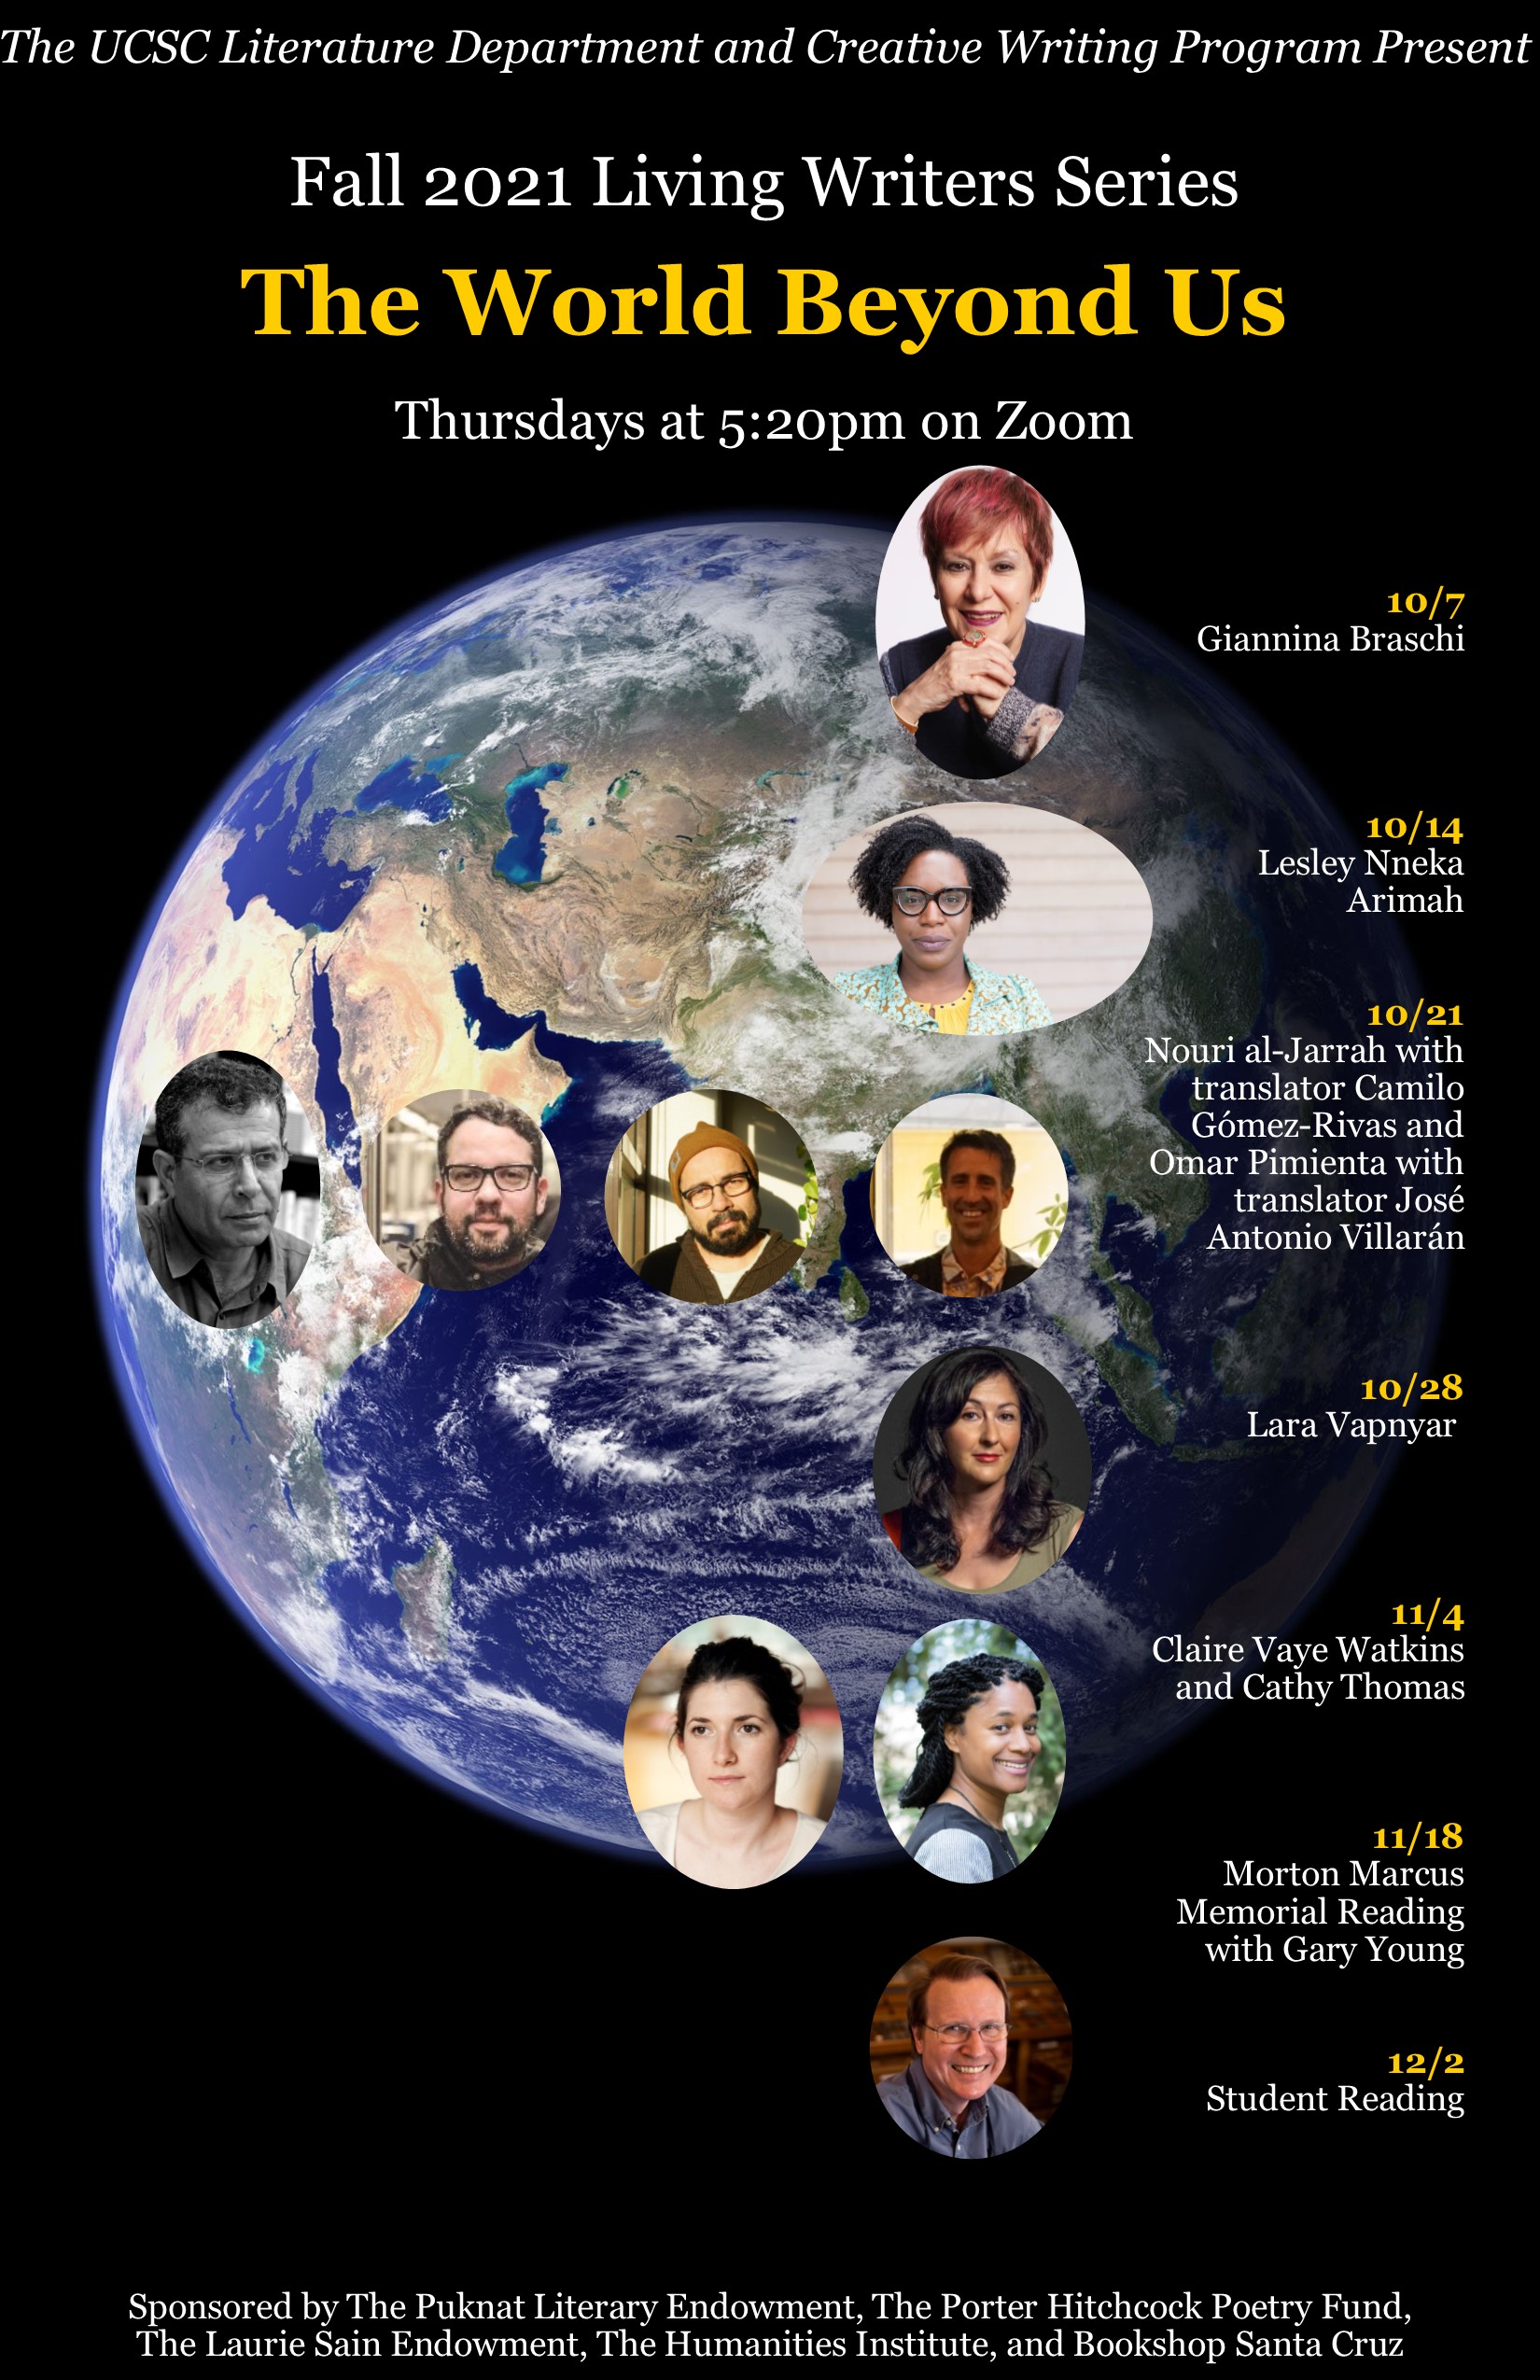 The World Beyond Us: A Living Writers Series               Fall Quarter, 2021 Thursdays, 5:20 PM on Zoom Schedule 10/7  Giannina Braschi  10/14  Lesley Nneka Arimah  10/21  Nouri al-Jarrah with translator Camilo Gómez-Rivas and Omar Pimienta with translator José Antonio Villarán  10/28  Lara Vapnyar   11/4  Claire Vaye Watkins and Cathy Thomas  11/18  Morton Marcus  Memorial Reading with Gary Young (Separate Registration Link)   12/2 Student Reading Registration Link (for most events) https://ucsc.zoom.us/meeting/register/tJUpcOmsqTgiE9BQW44ZA6uXHwNo2U5DvtS5  Registration Link for the 11/18 Morton Marcus Memorial Reading Link will become available on this site: https://thi.ucsc.edu/event/gary-young-morton-marcus-poetry-reading/ 